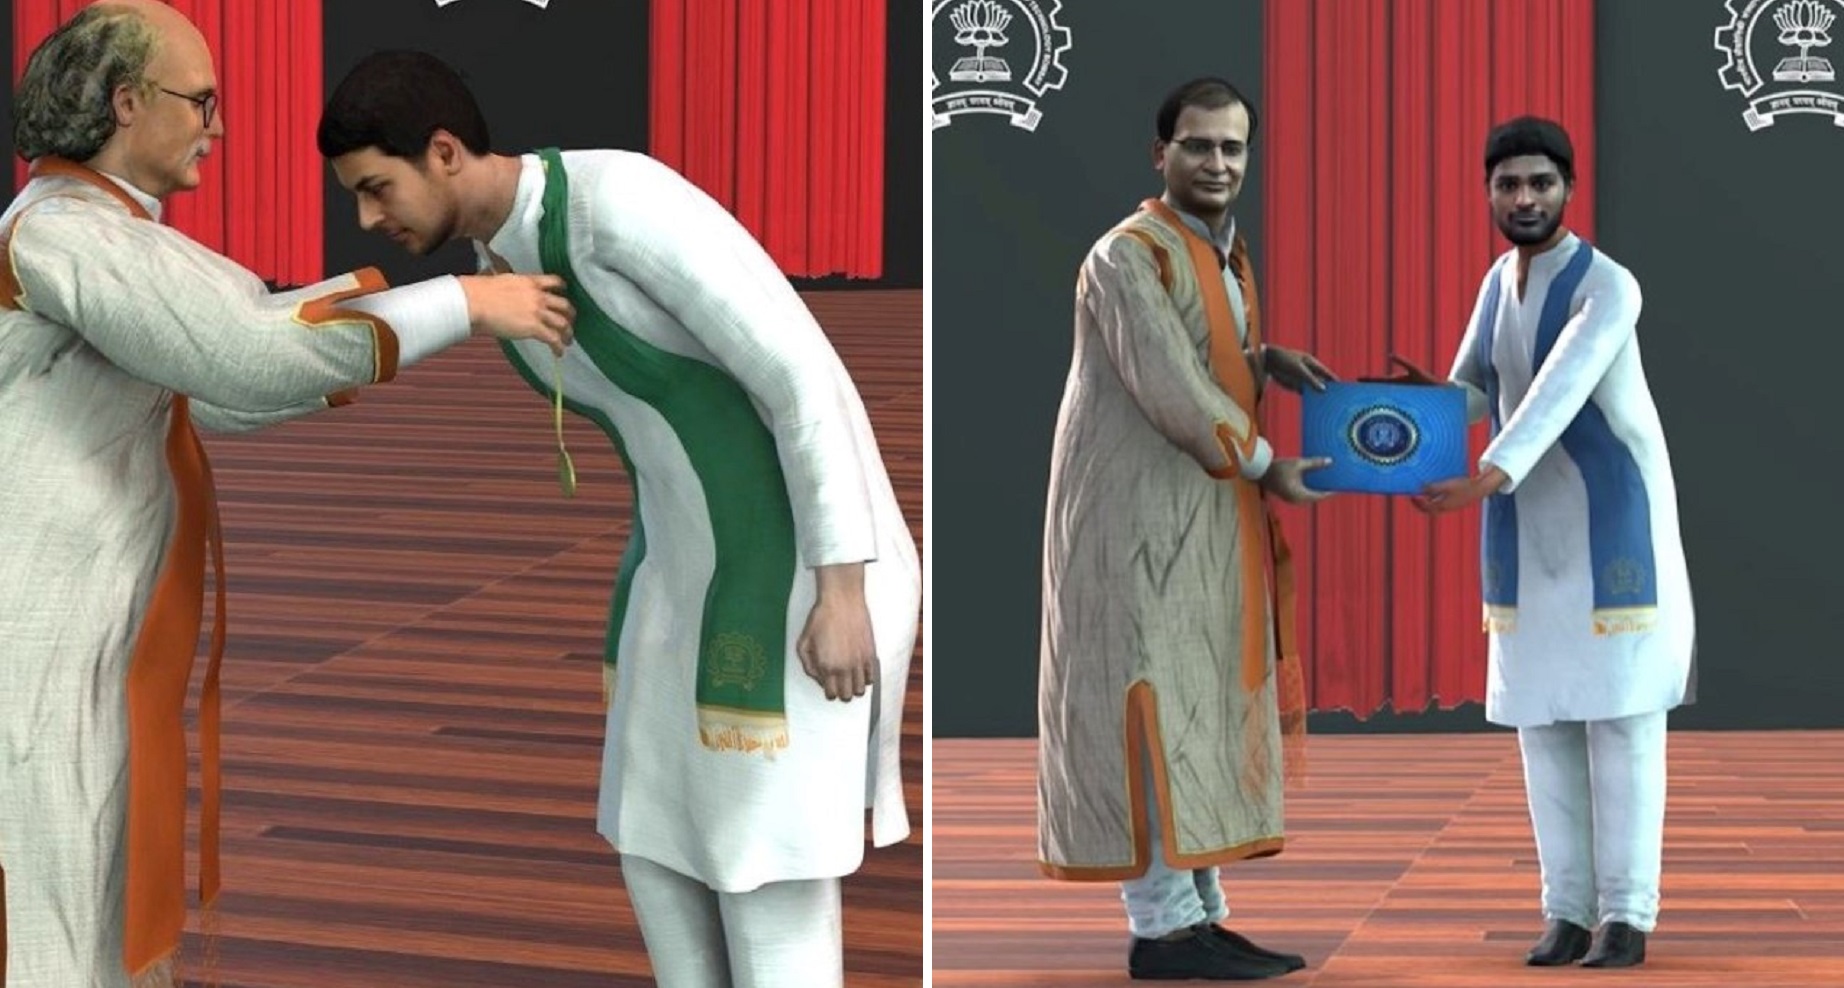 IIT Bombay Hosts Virtual Convocation With Digital Avatars Of Students [Video]